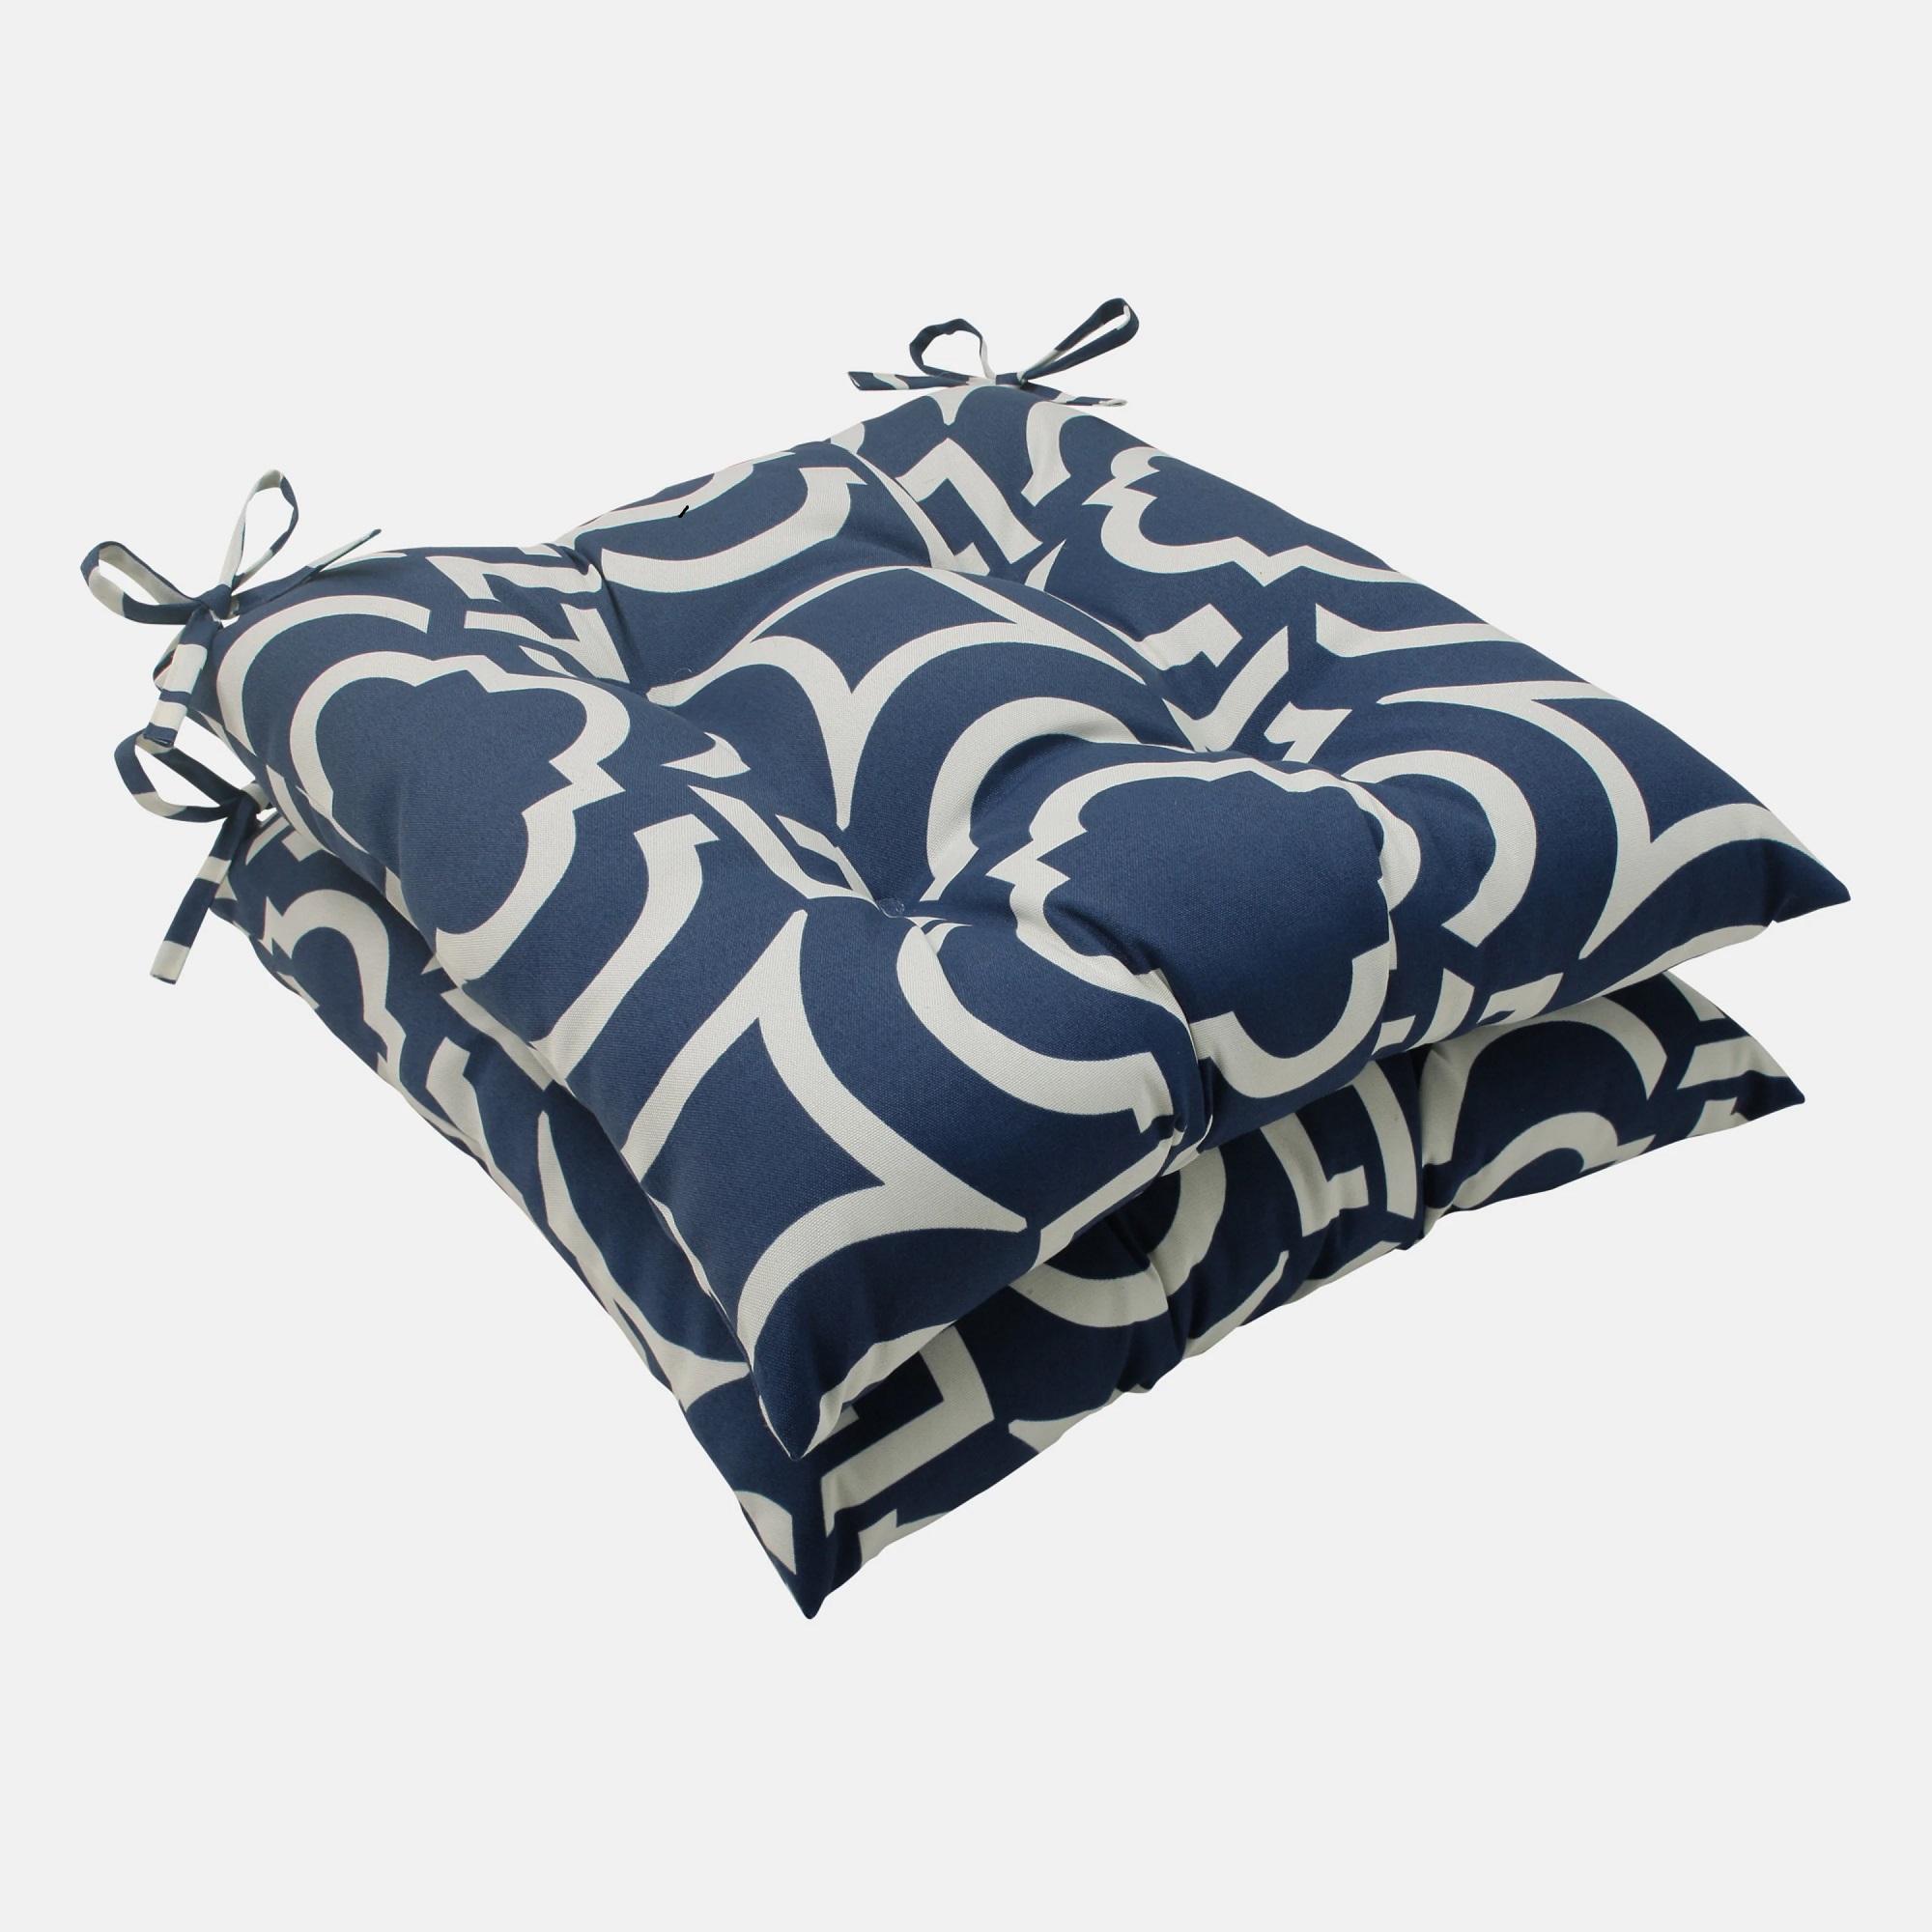 CC Outdoor Living Set of 2 Navy Blue and White Geometric Tufted Outdoor Patio Seat Cushions 19"